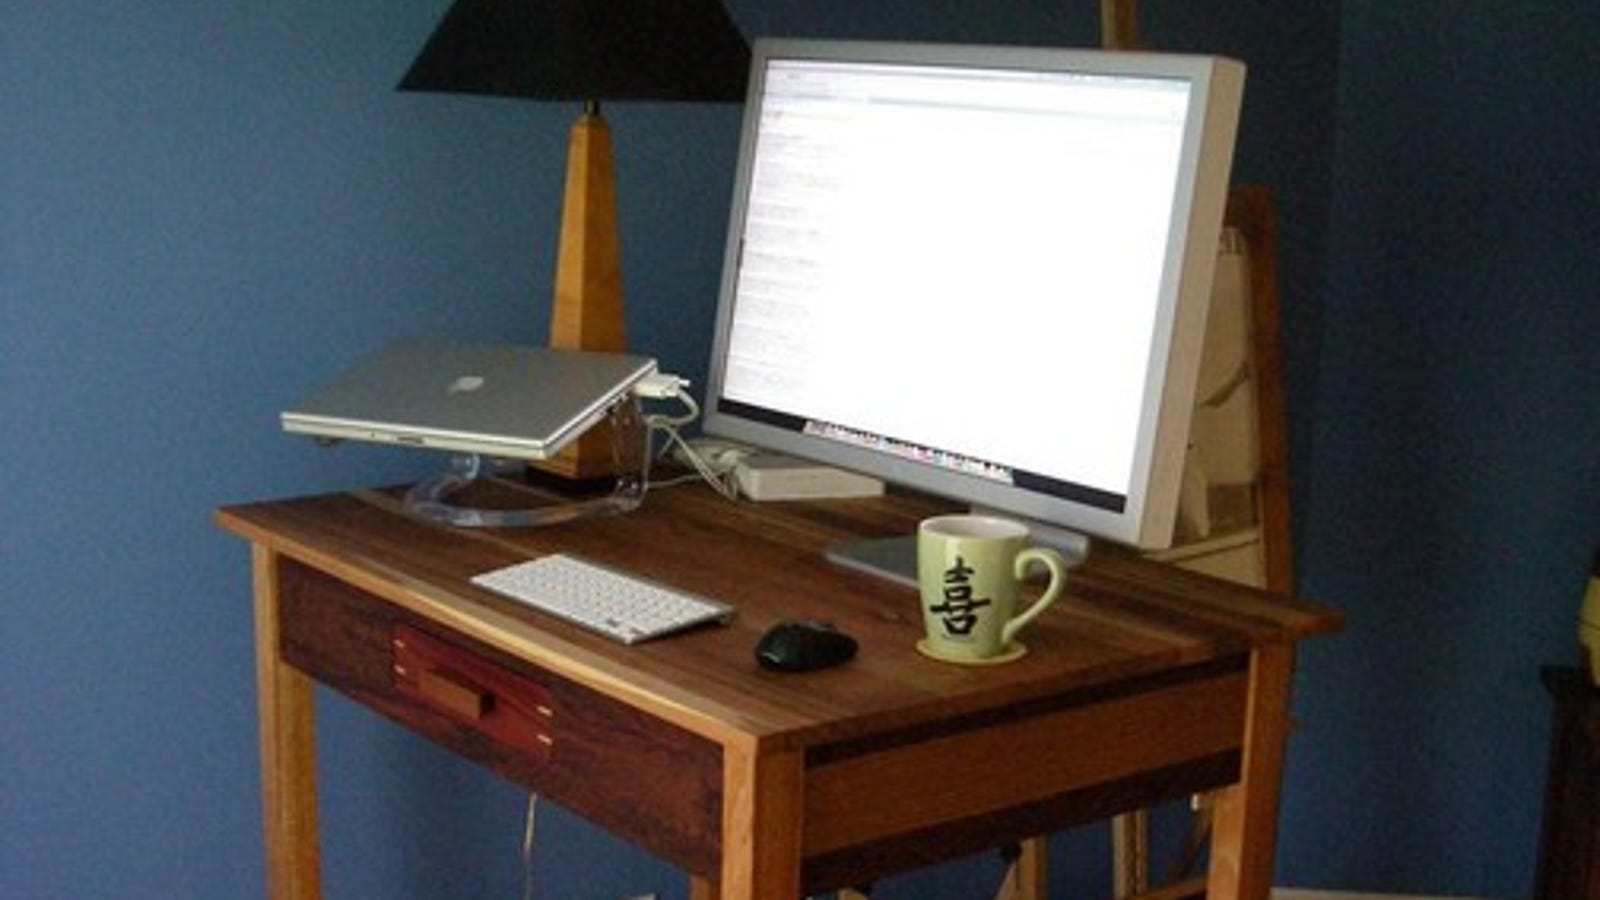 The Handcrafted Standing Desk